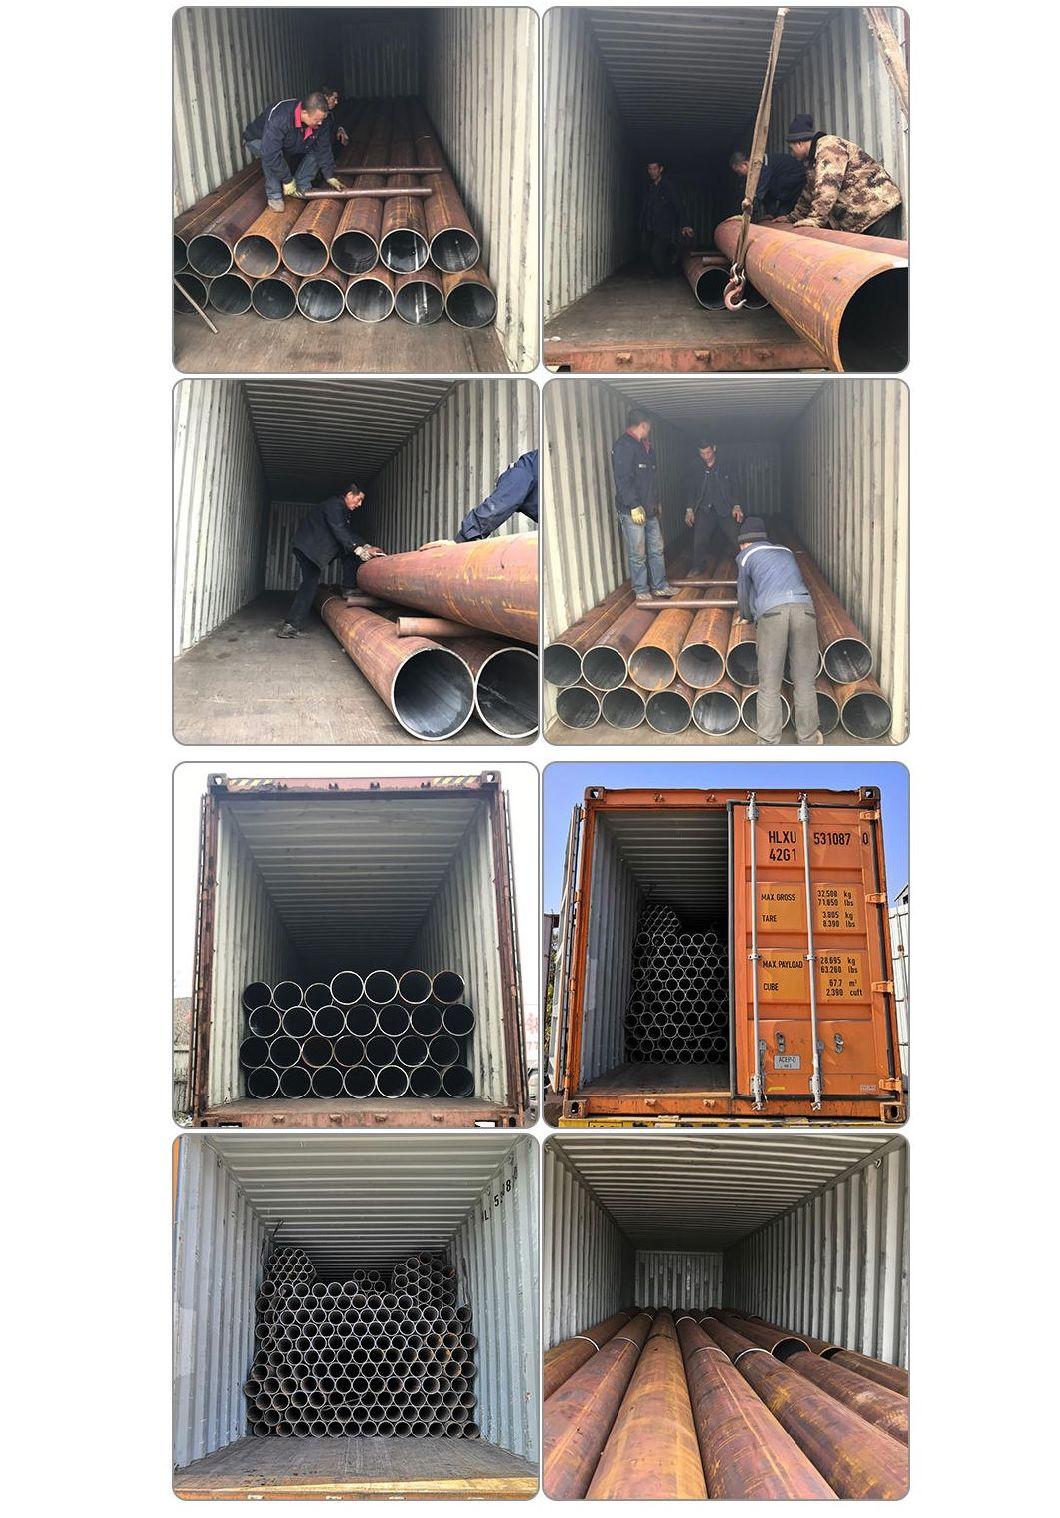 1040 Carbon Steel Pipeseamless Pipe Carbon Steelcarbon SSAW Steel Pipe